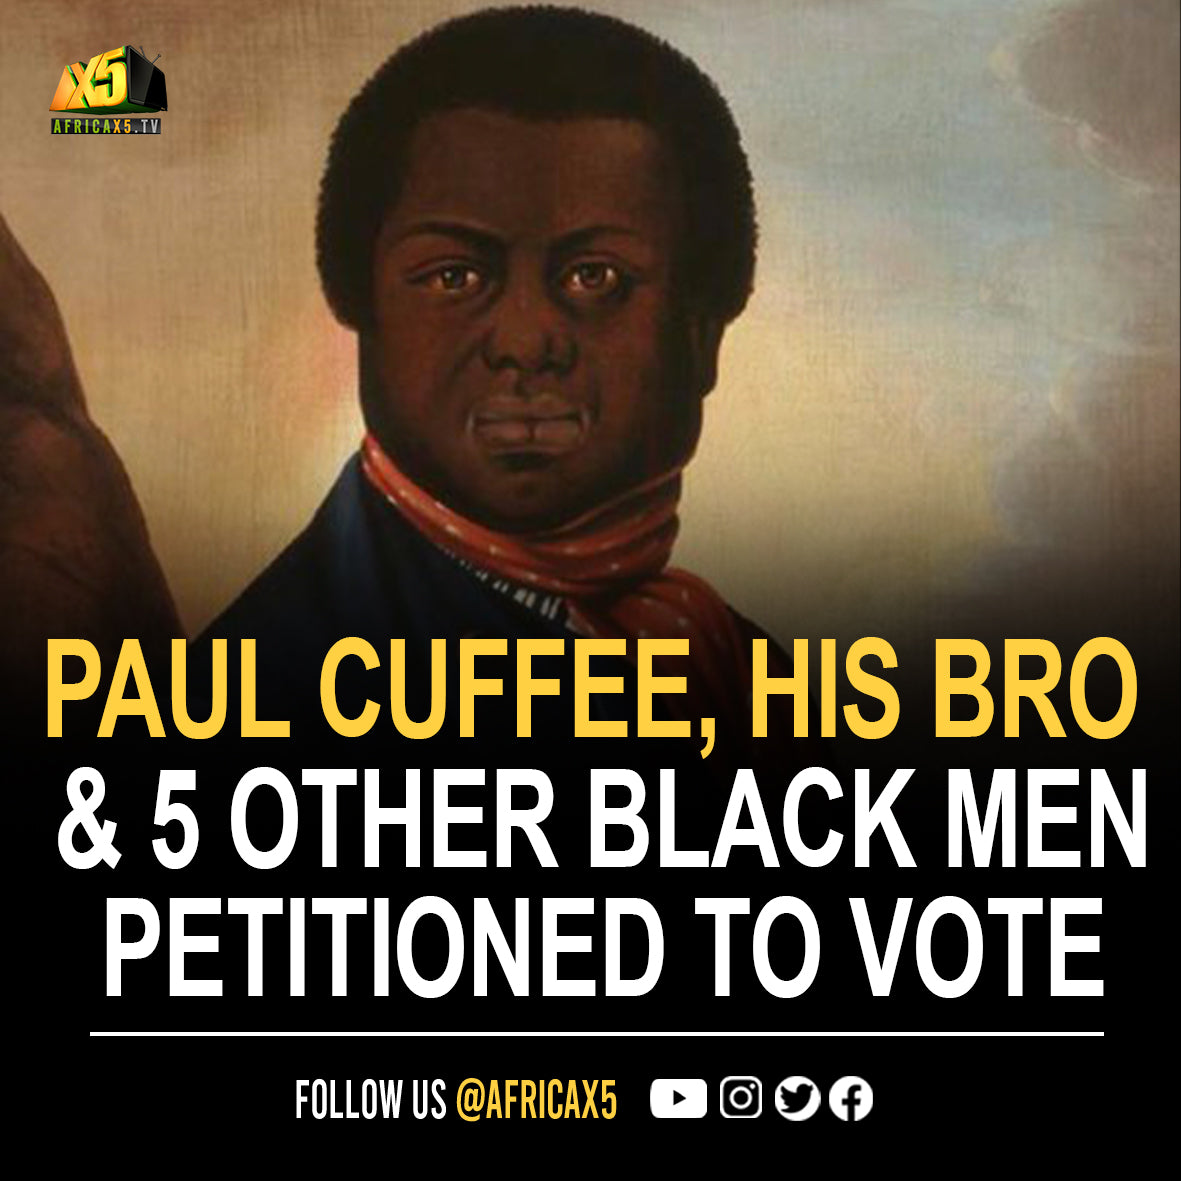 Paul Cuffee, his brother & 5 other Black men petitioned the Massachusetts legislature demanding the right to vote.